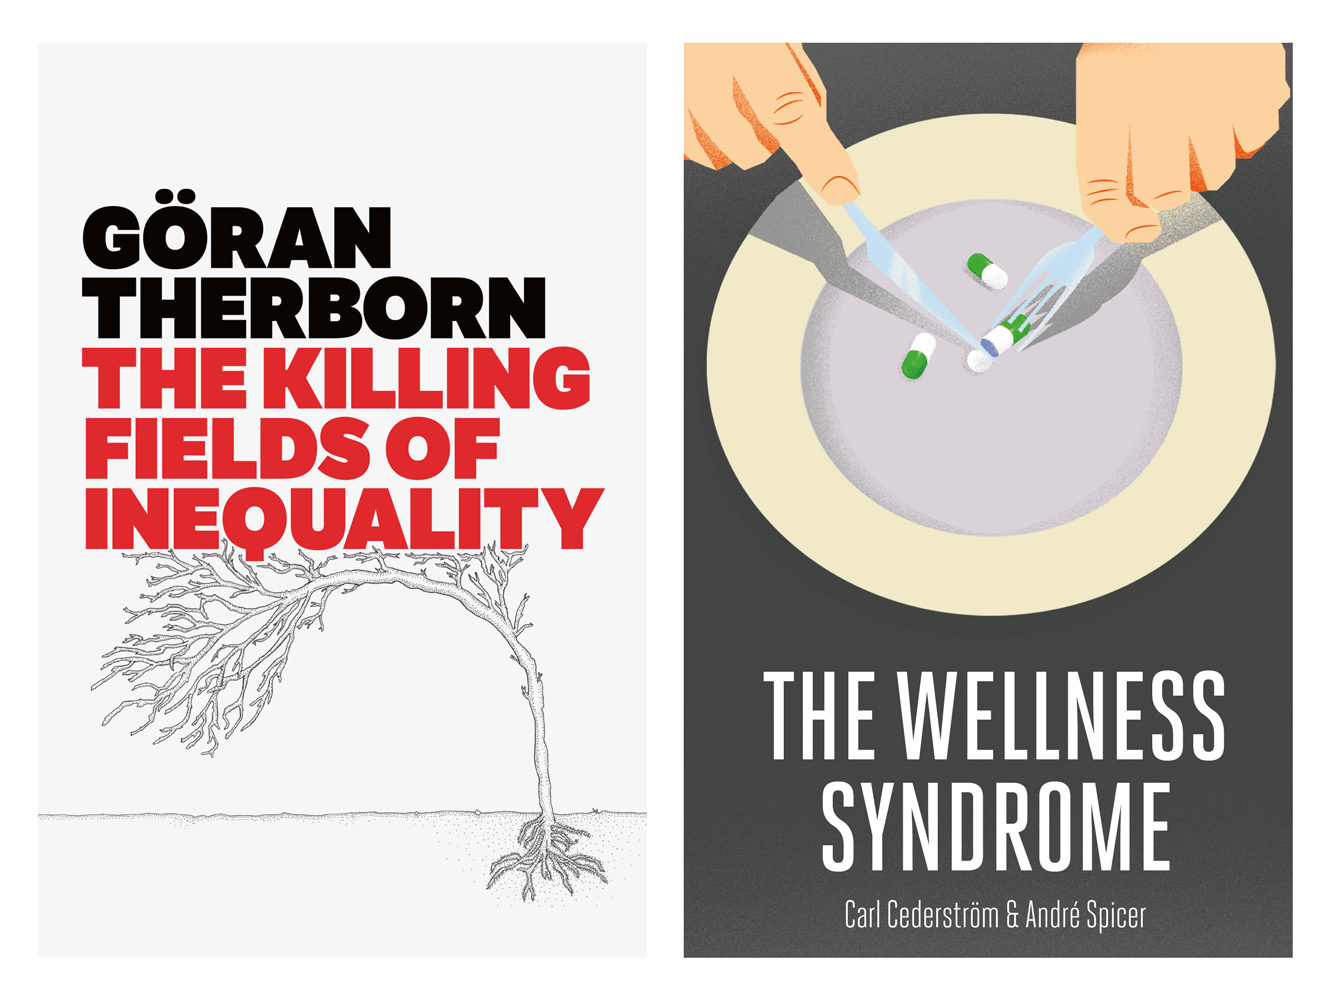 Book Cover Design For The Killing Fields Of Inequality And The Wellness Syndrome By Polity Books. Designed By &&& Creative